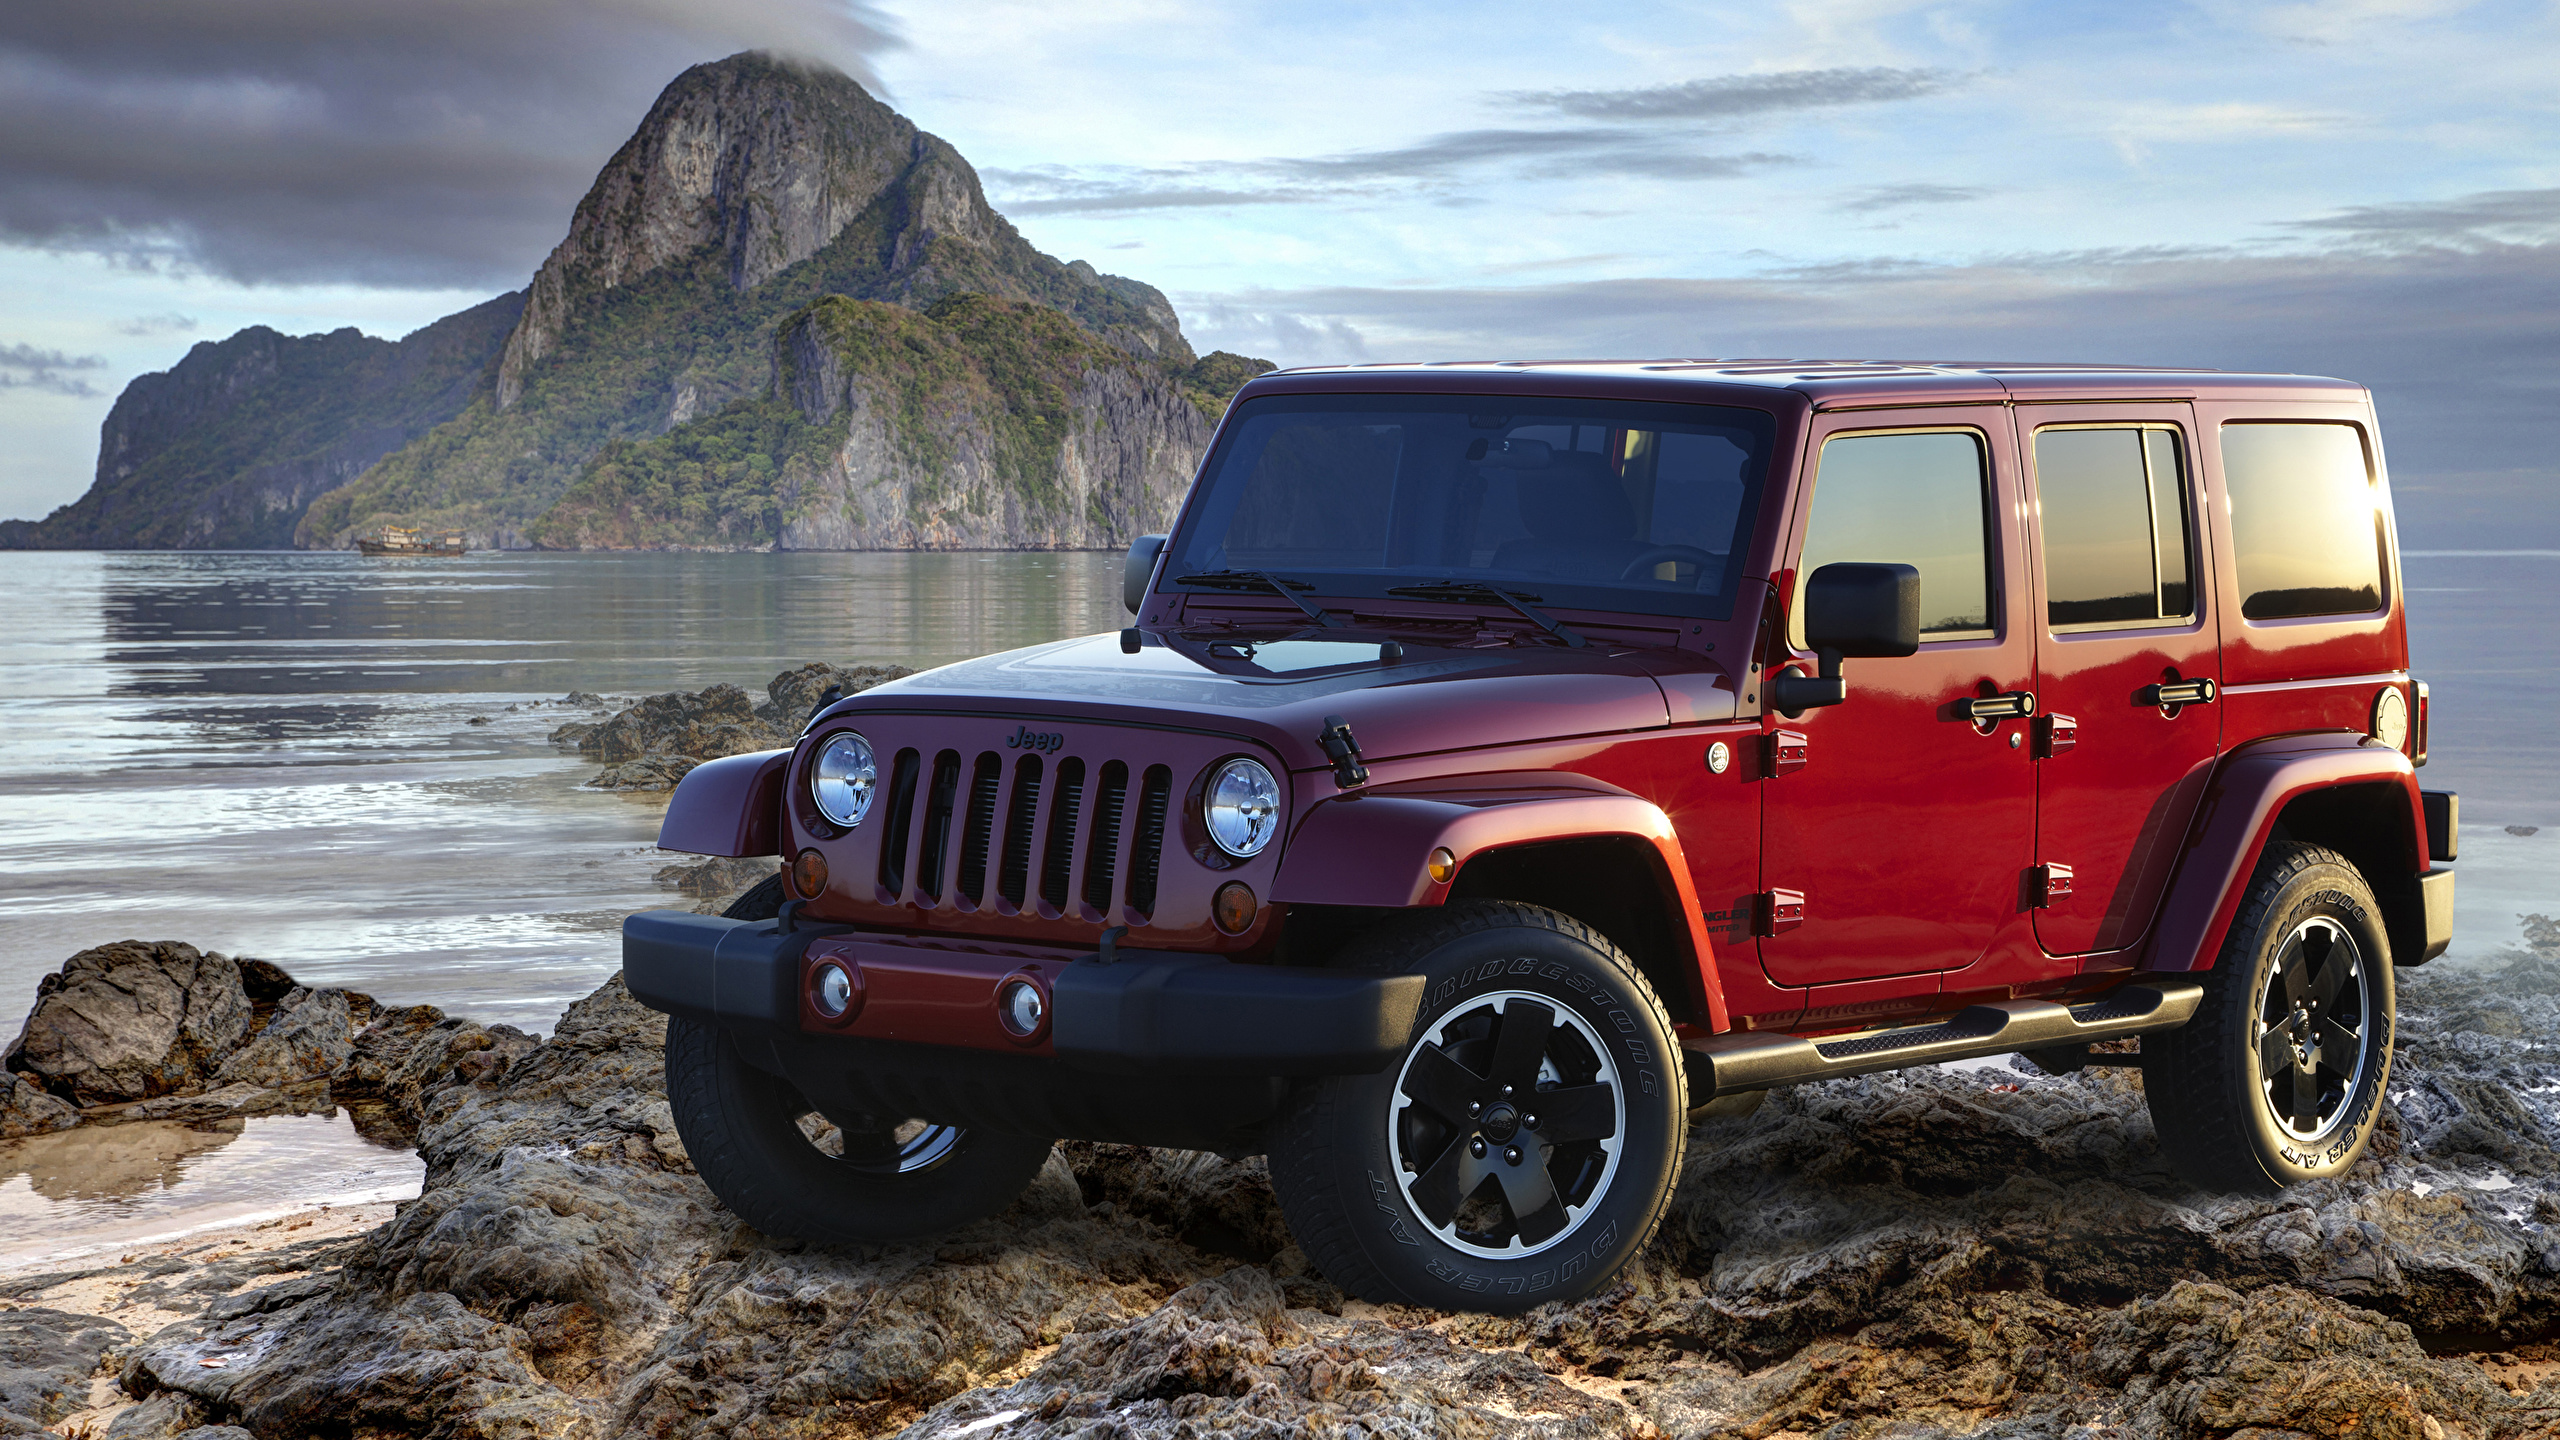 Picture Jeep Tuning 2012 Wrangler Unlimited Altitude Red 2560x1440